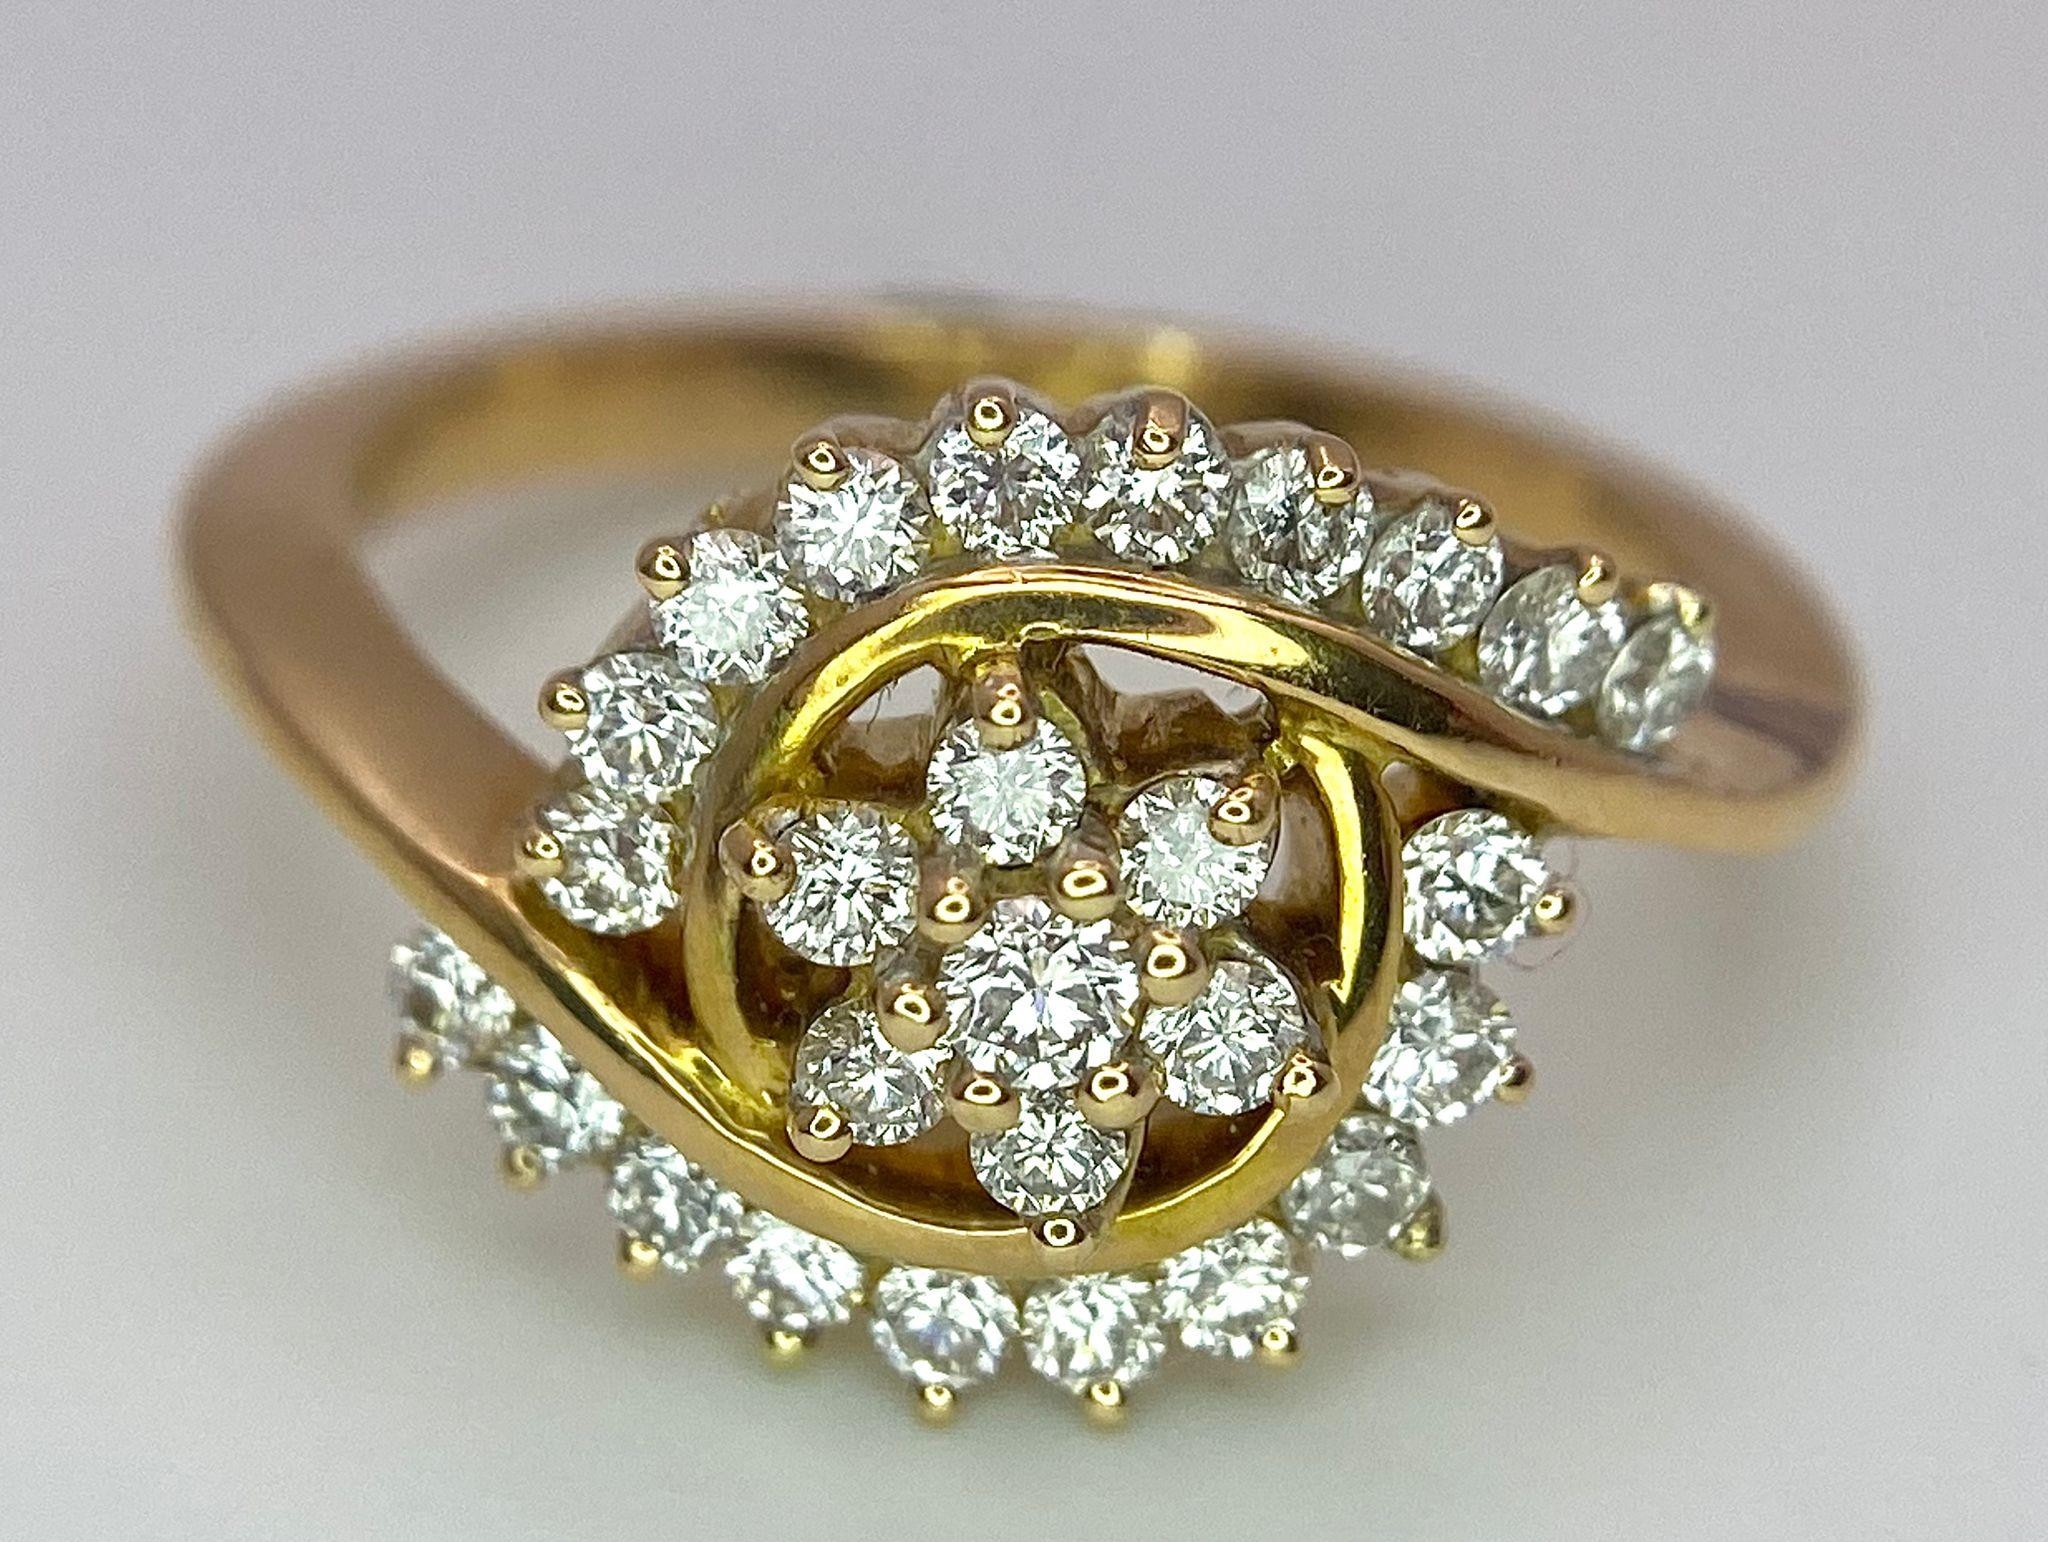 An attractive 14K Yellow Gold (tested as) Diamond Swirl Ring, 0.55ct diamond weight, 4.6g total - Image 4 of 6